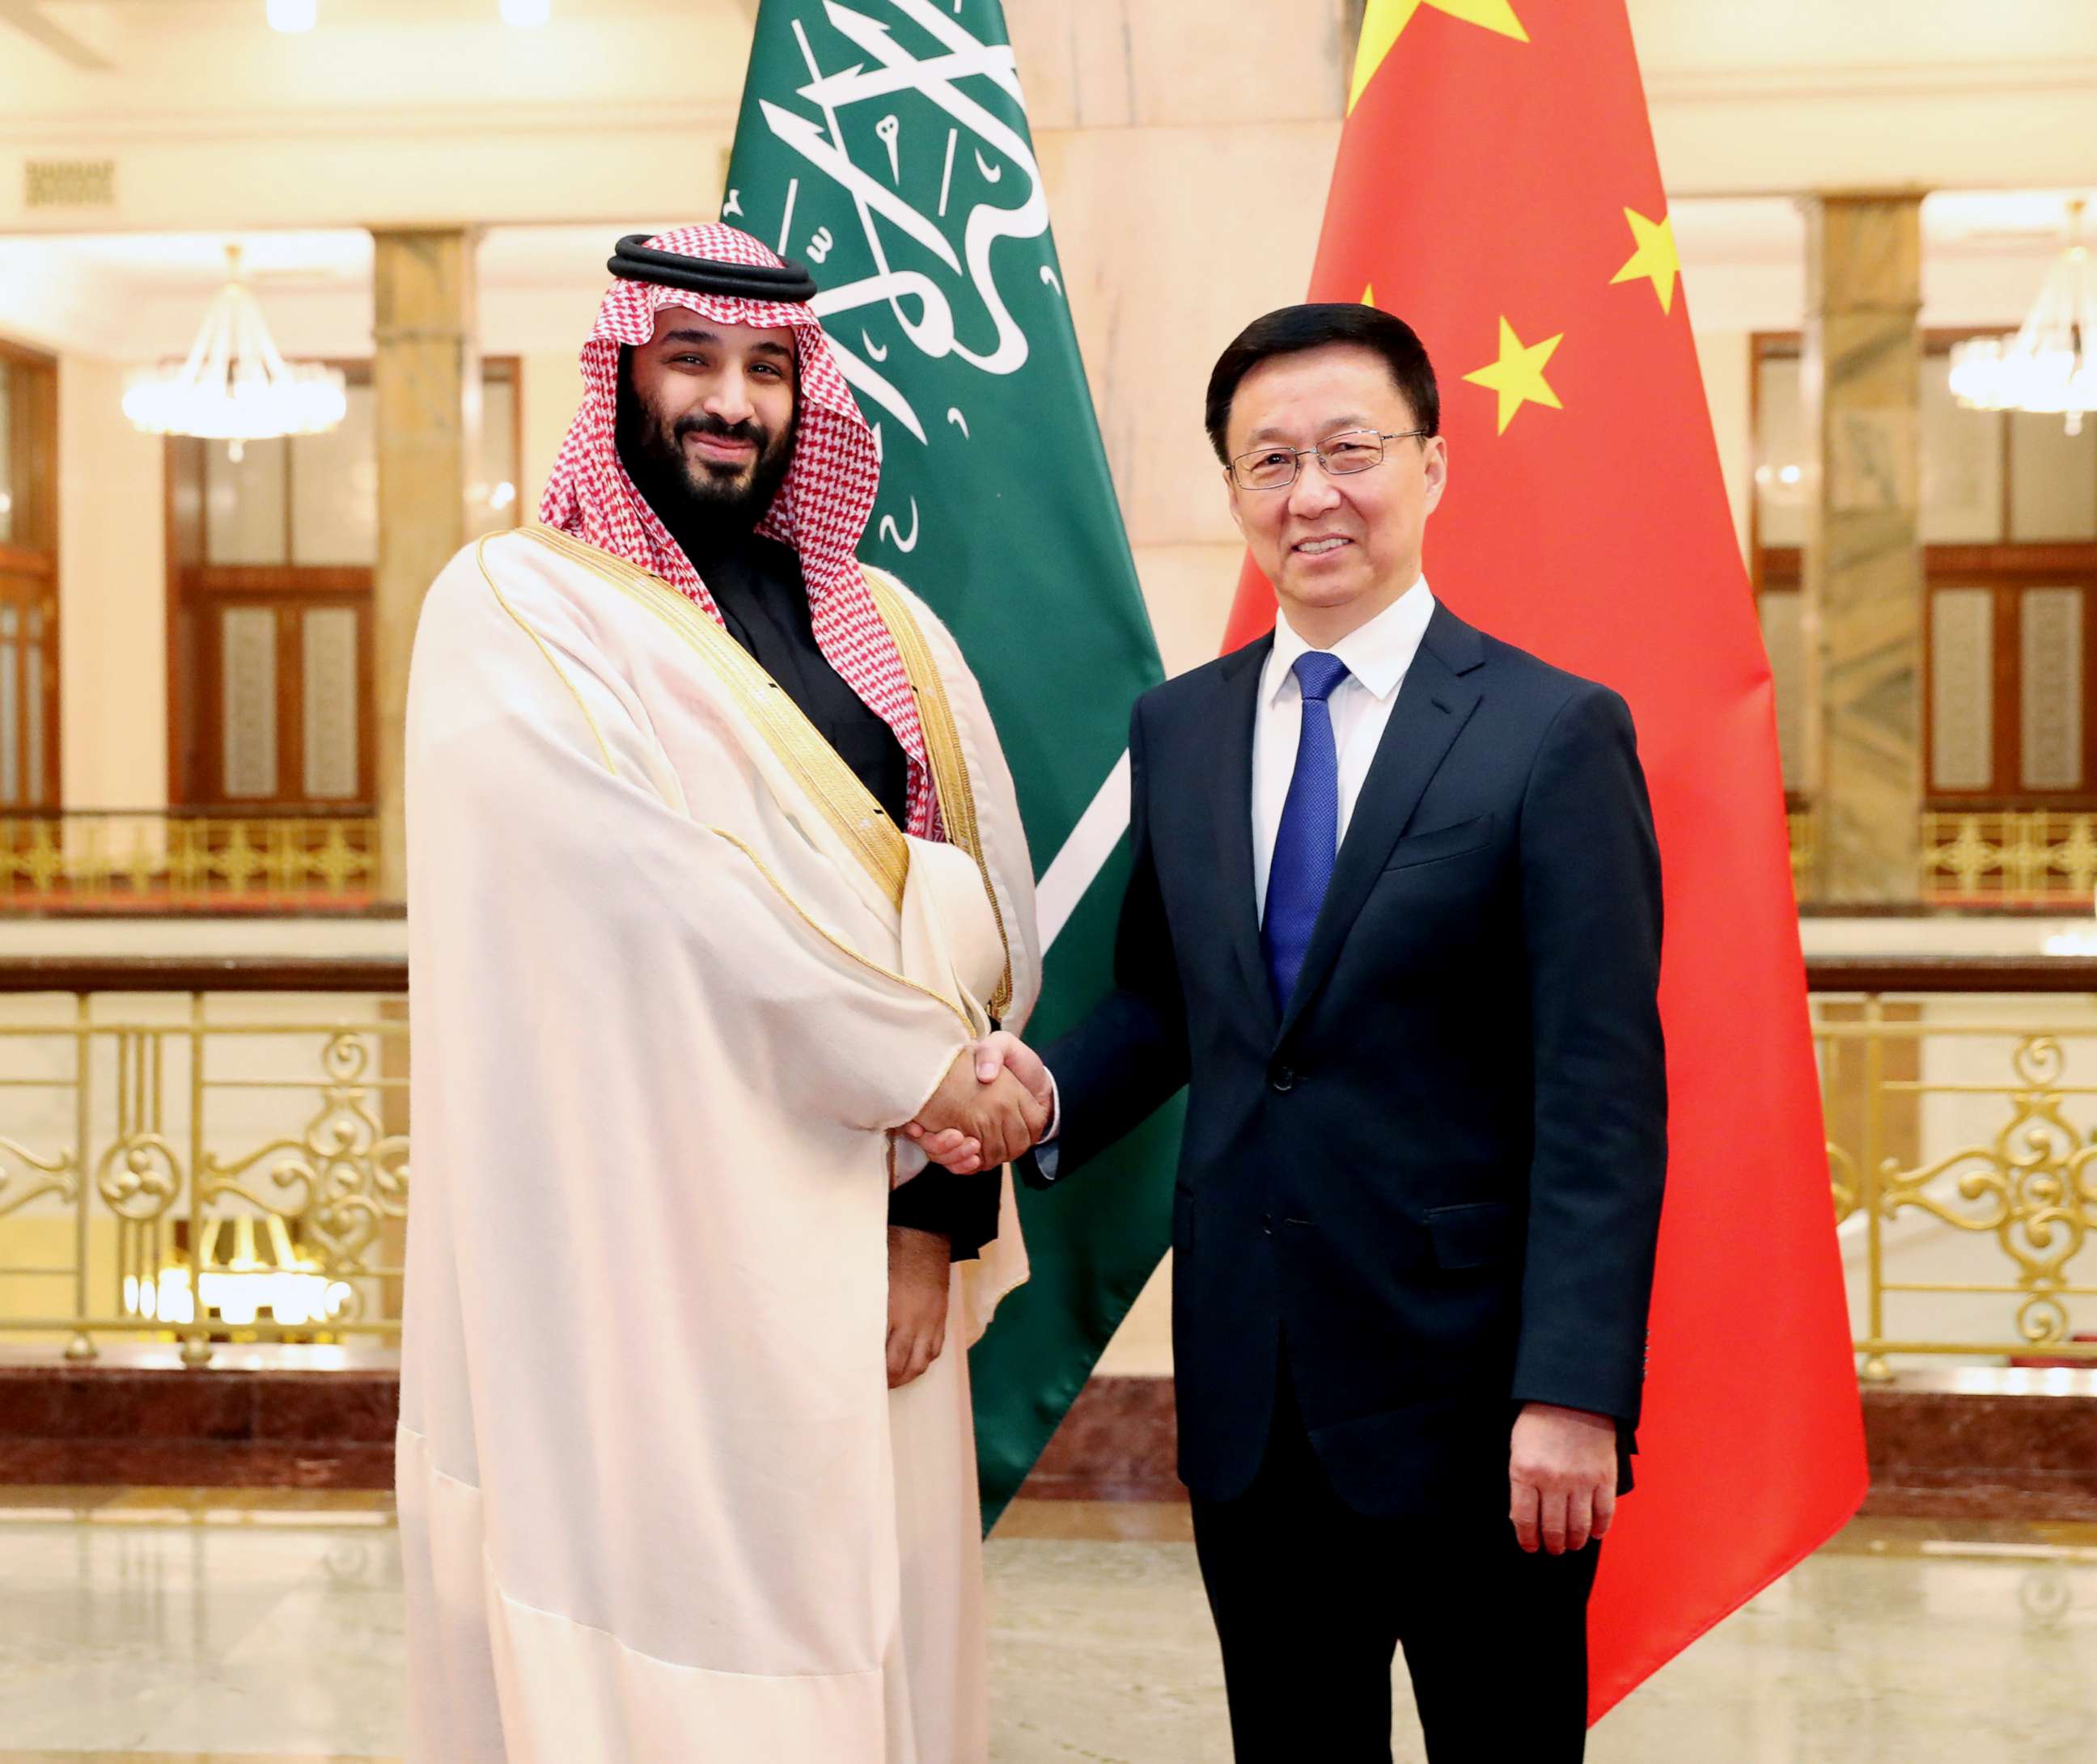 PHOTO: Chinese Vice Premier Han Zheng, right meets with Mohammed bin Salman Al Saud, Saudi Arabia's crown prince, deputy prime minister and minister of defense, in Beijing, Feb. 22, 2019.